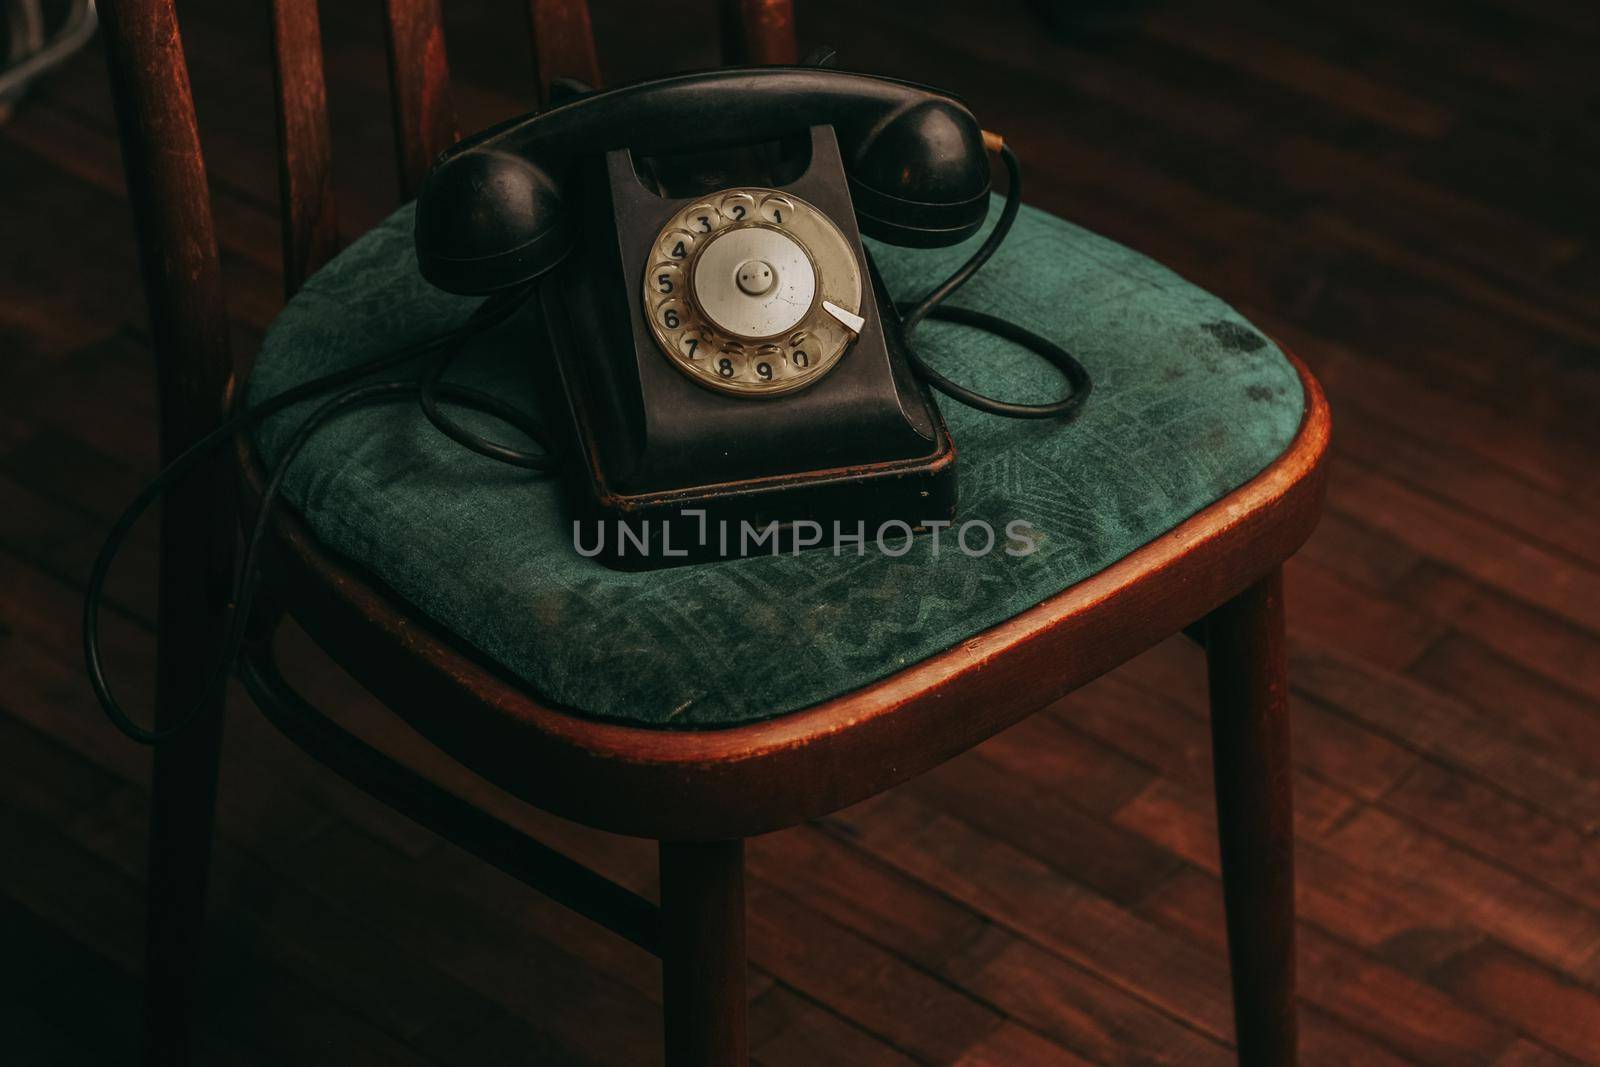 phone retro style classic classic communication old fashion by SHOTPRIME